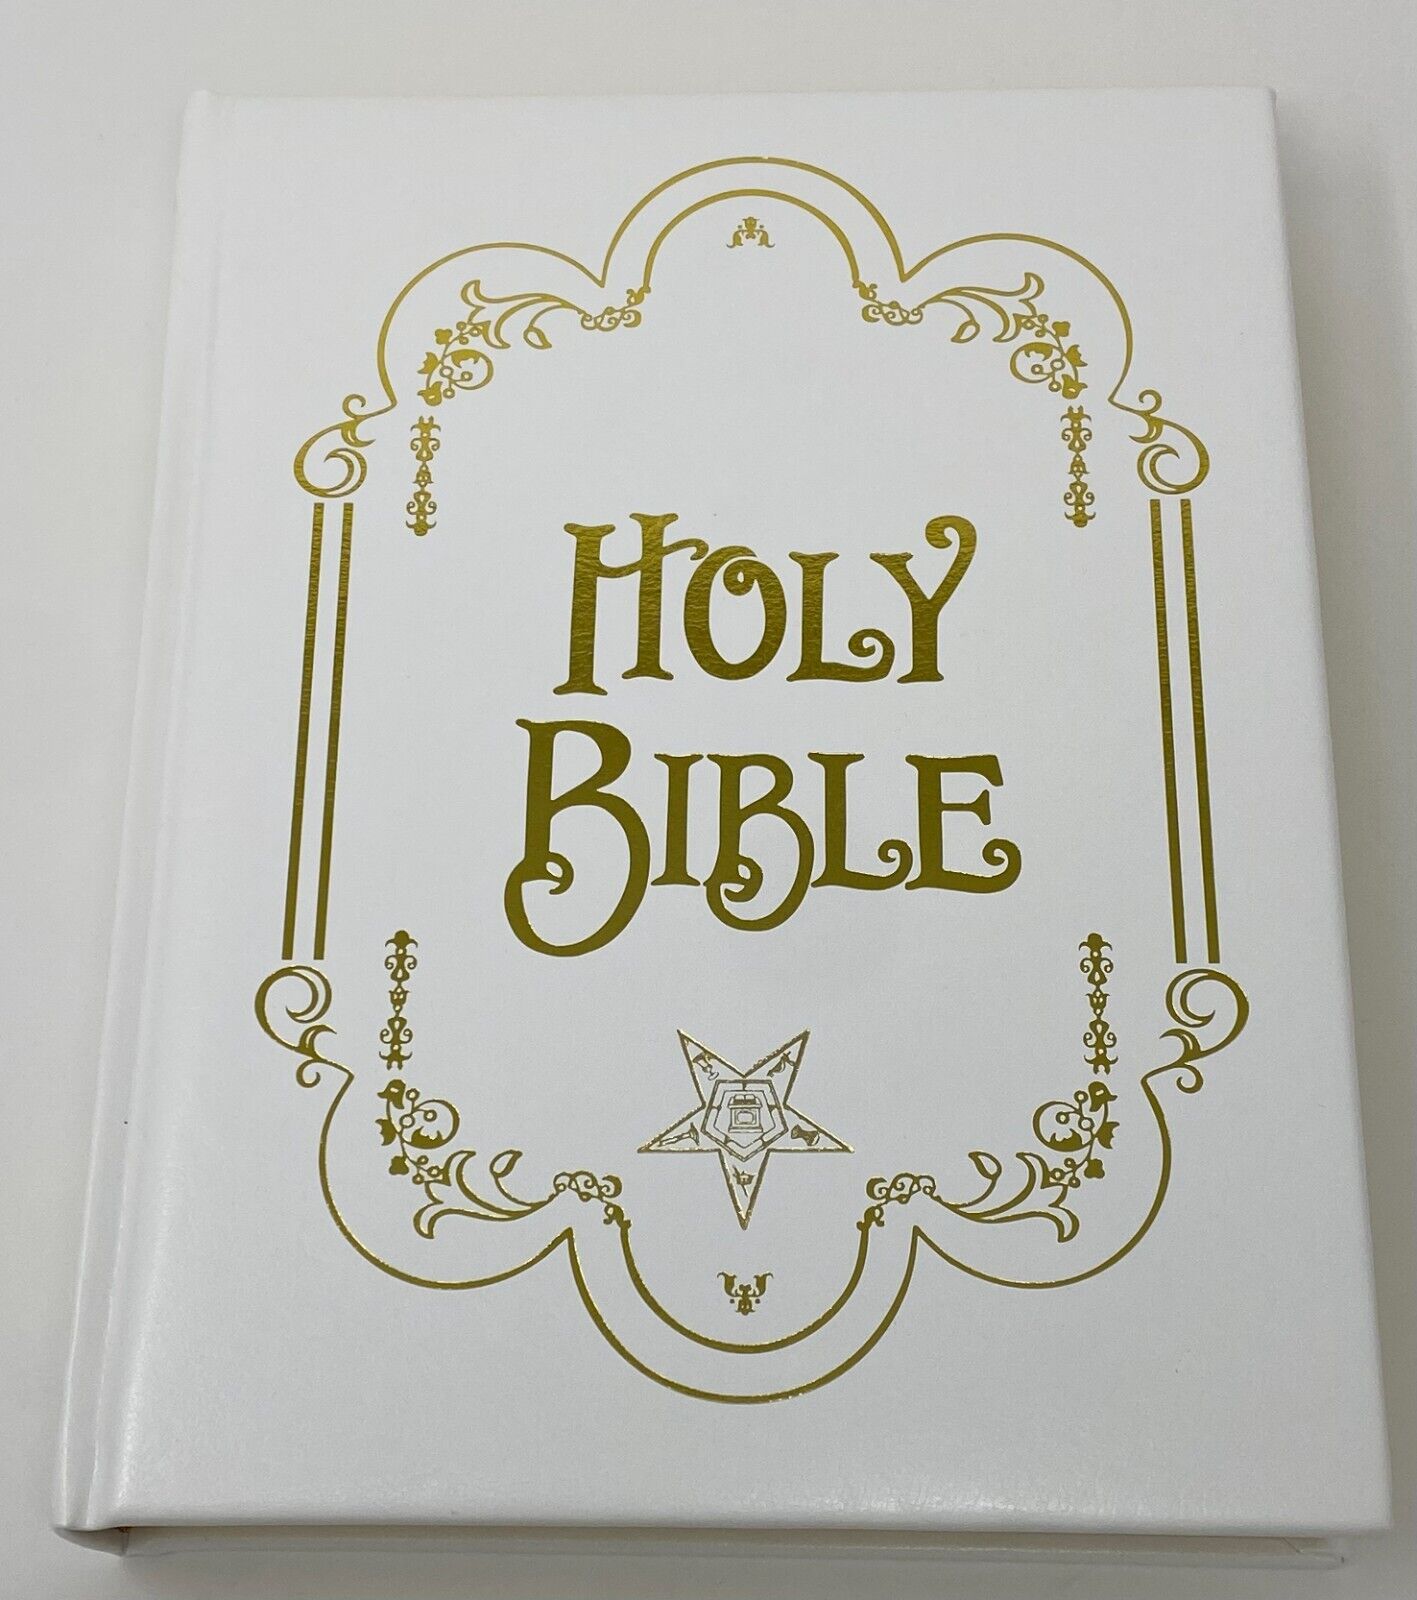 New Large Order of Eastern Star Alter Bible Family Edition Alter Bible